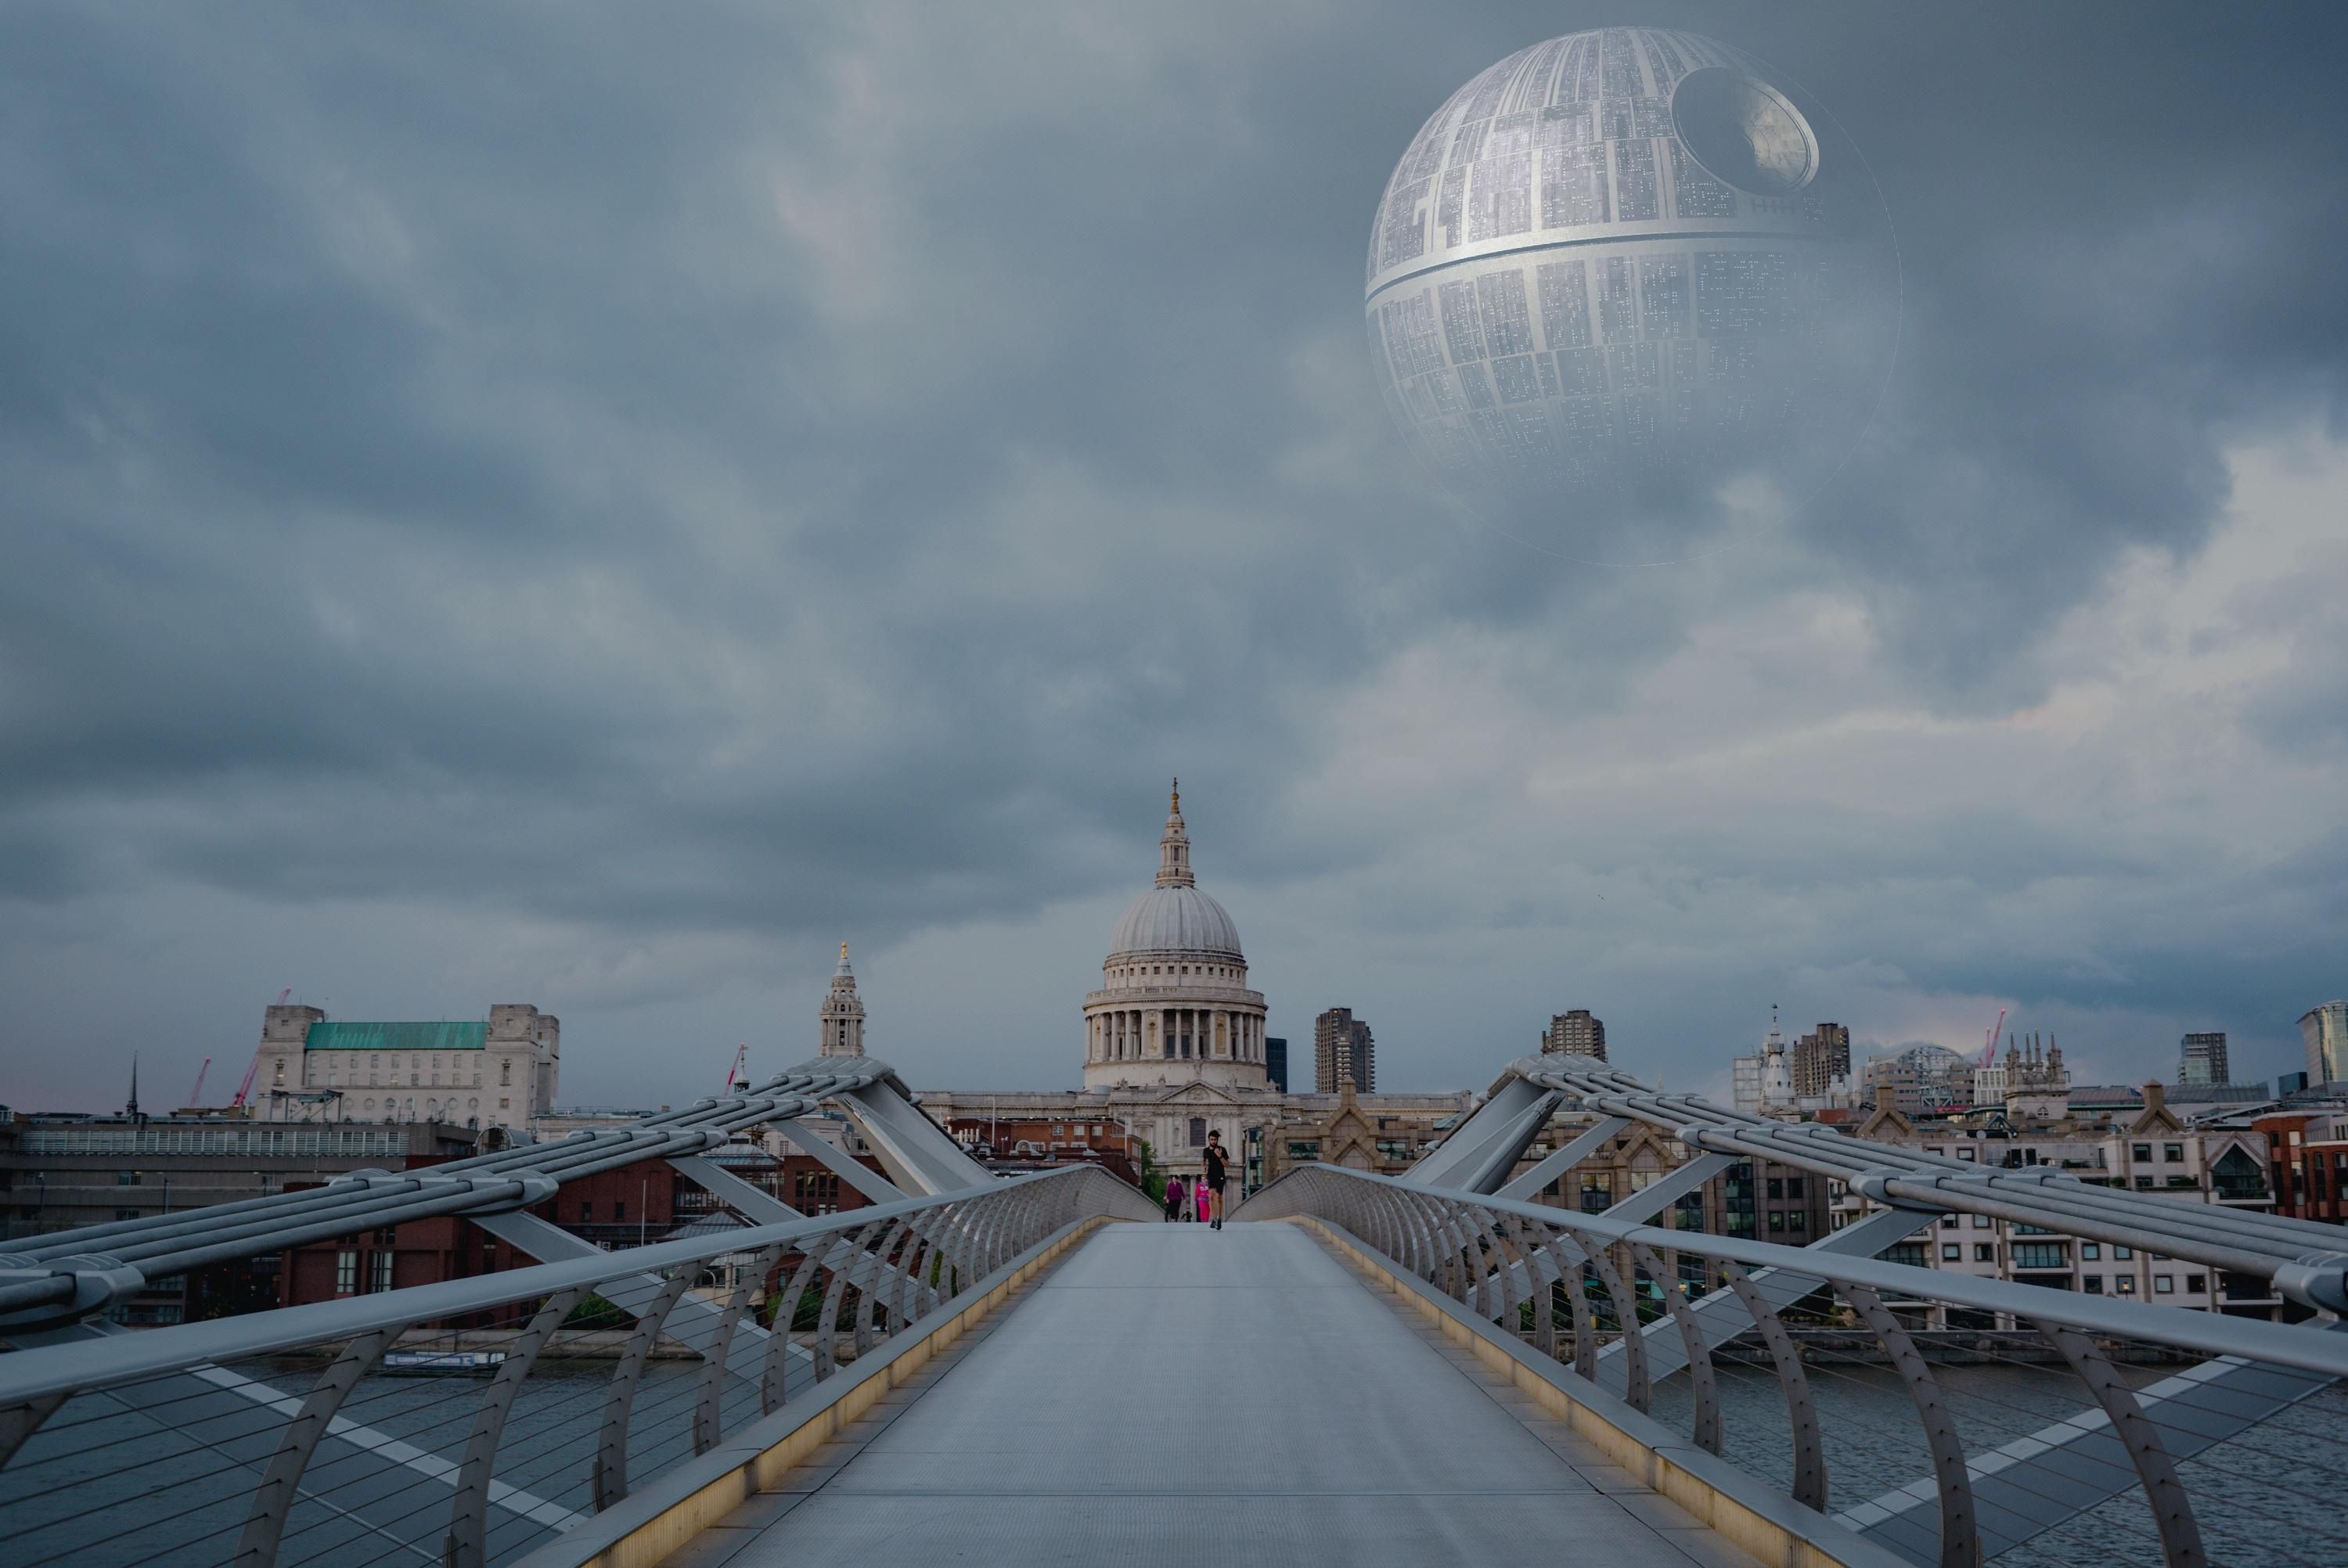 Due to less pollution we can finally see the Death Star.